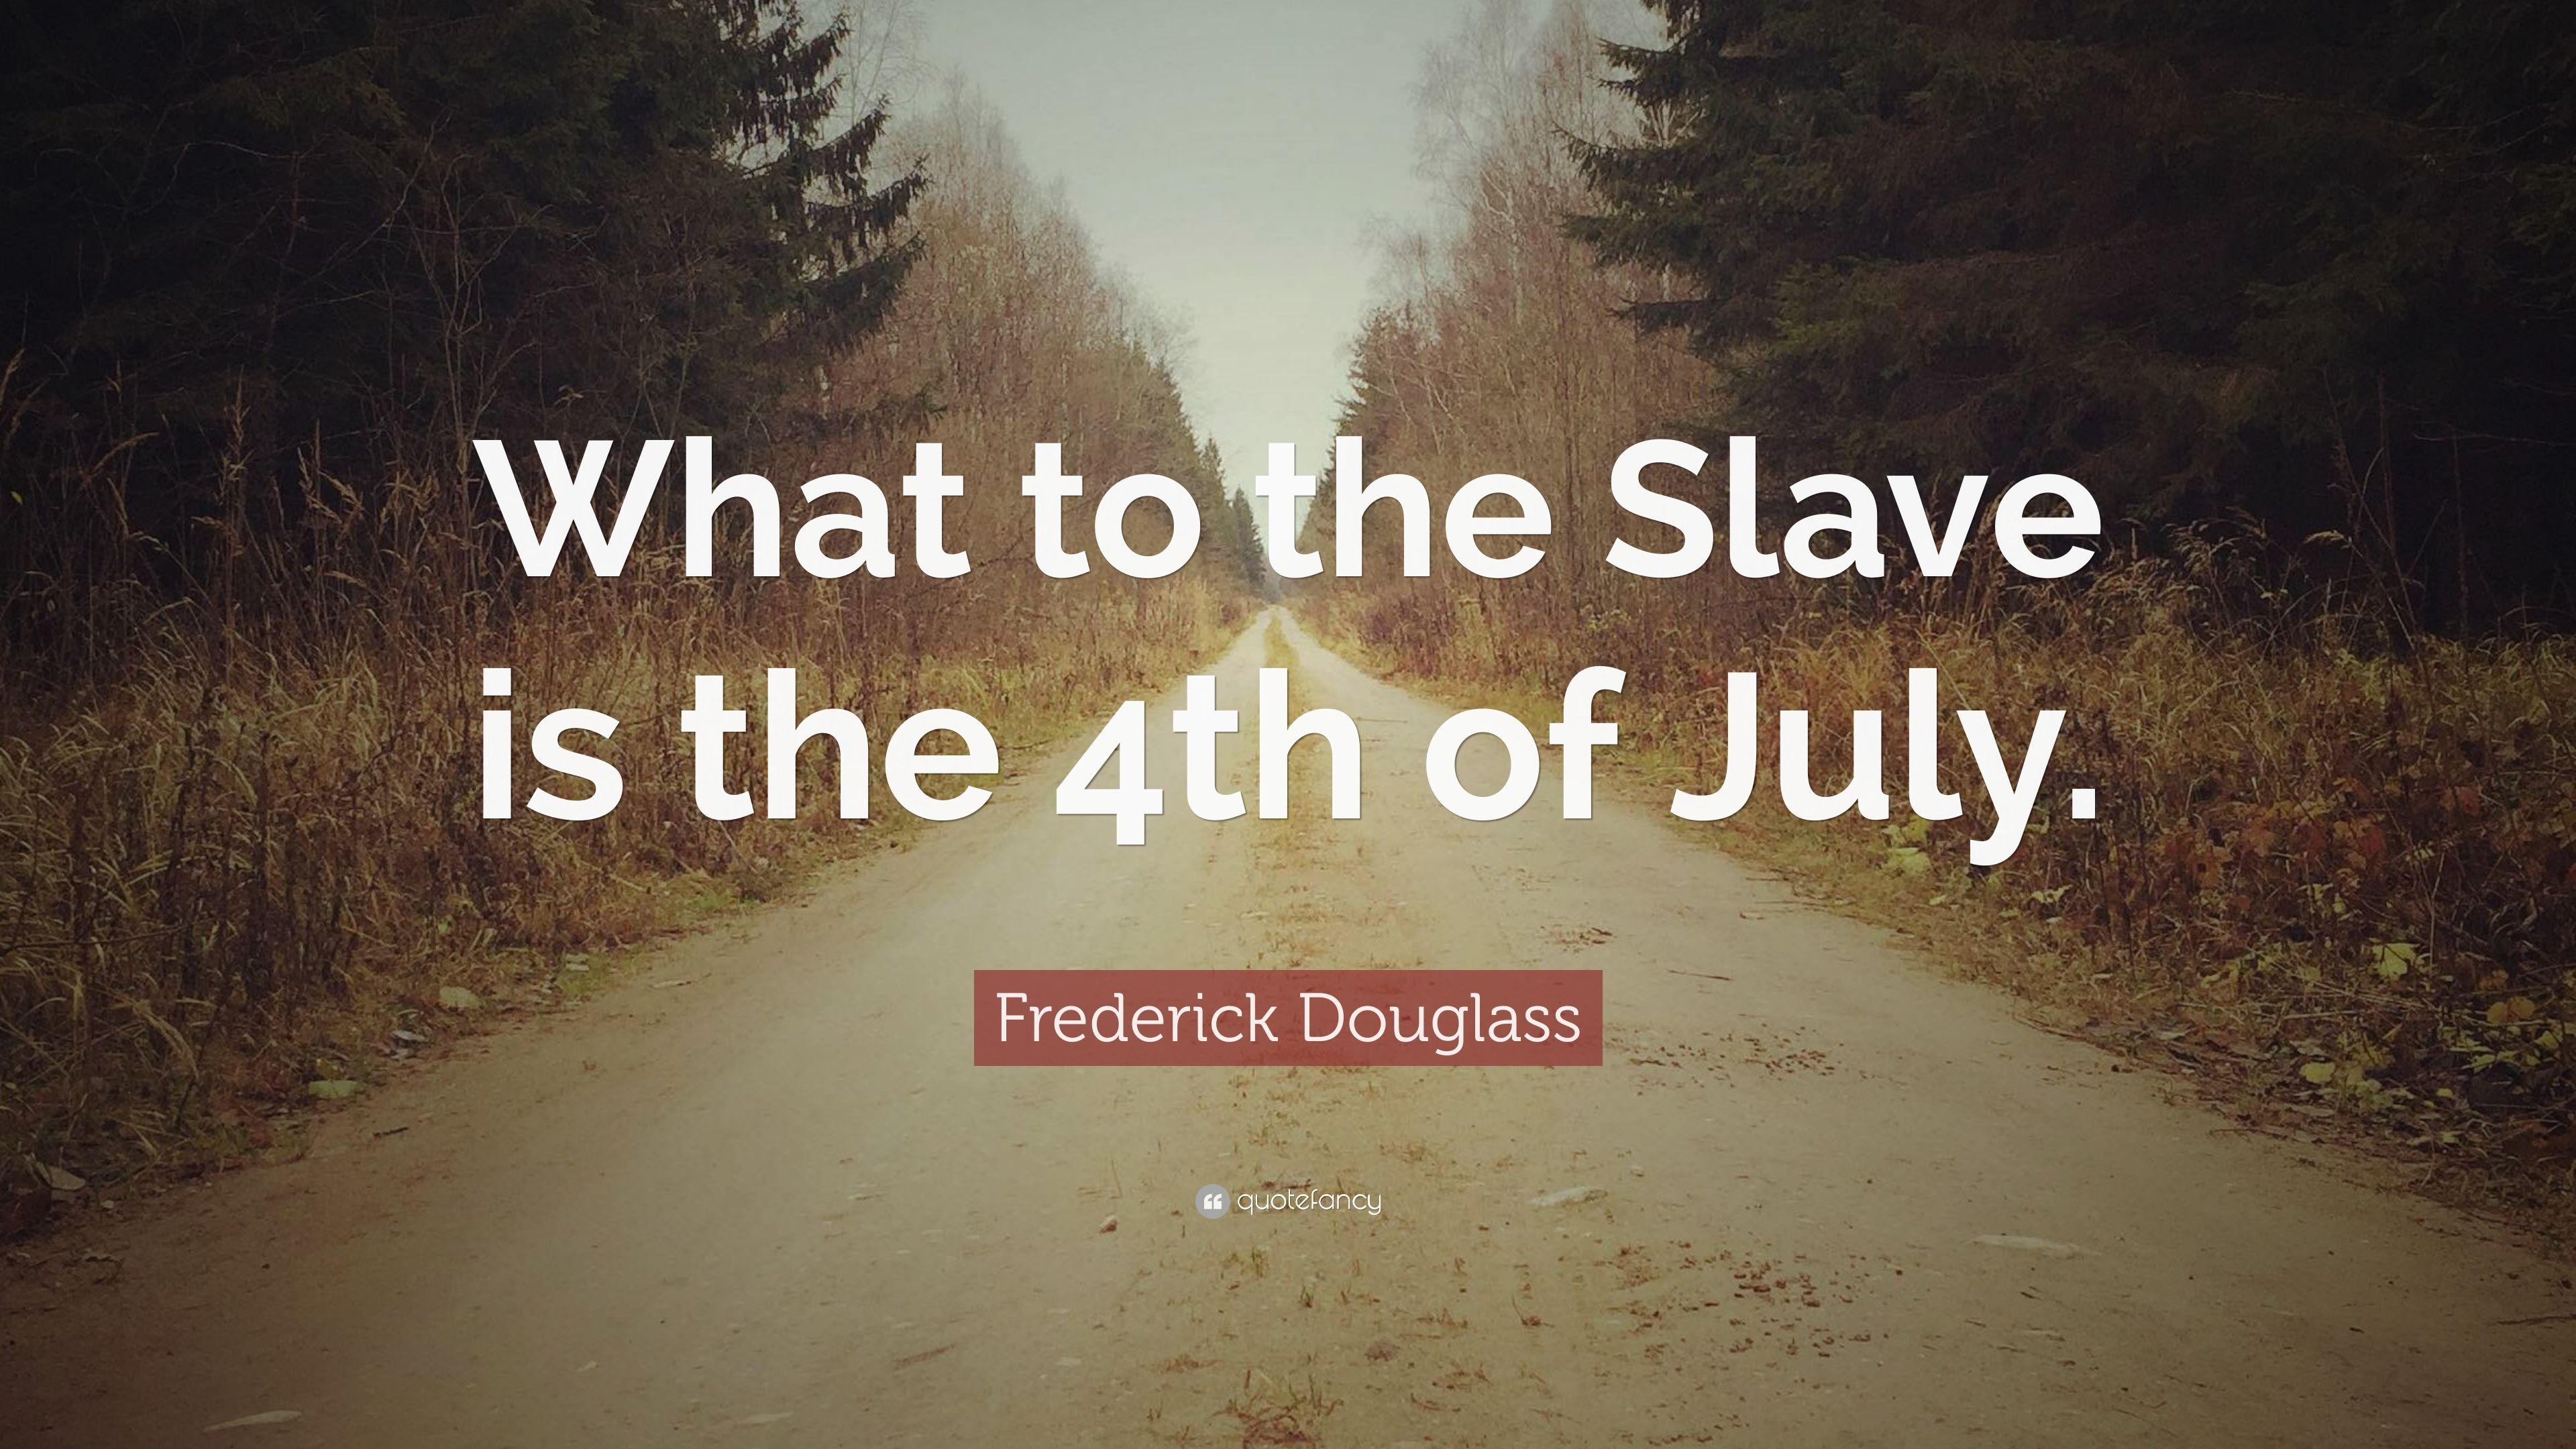 Frederick Douglass Quote: “What to the Slave is the 4th of July